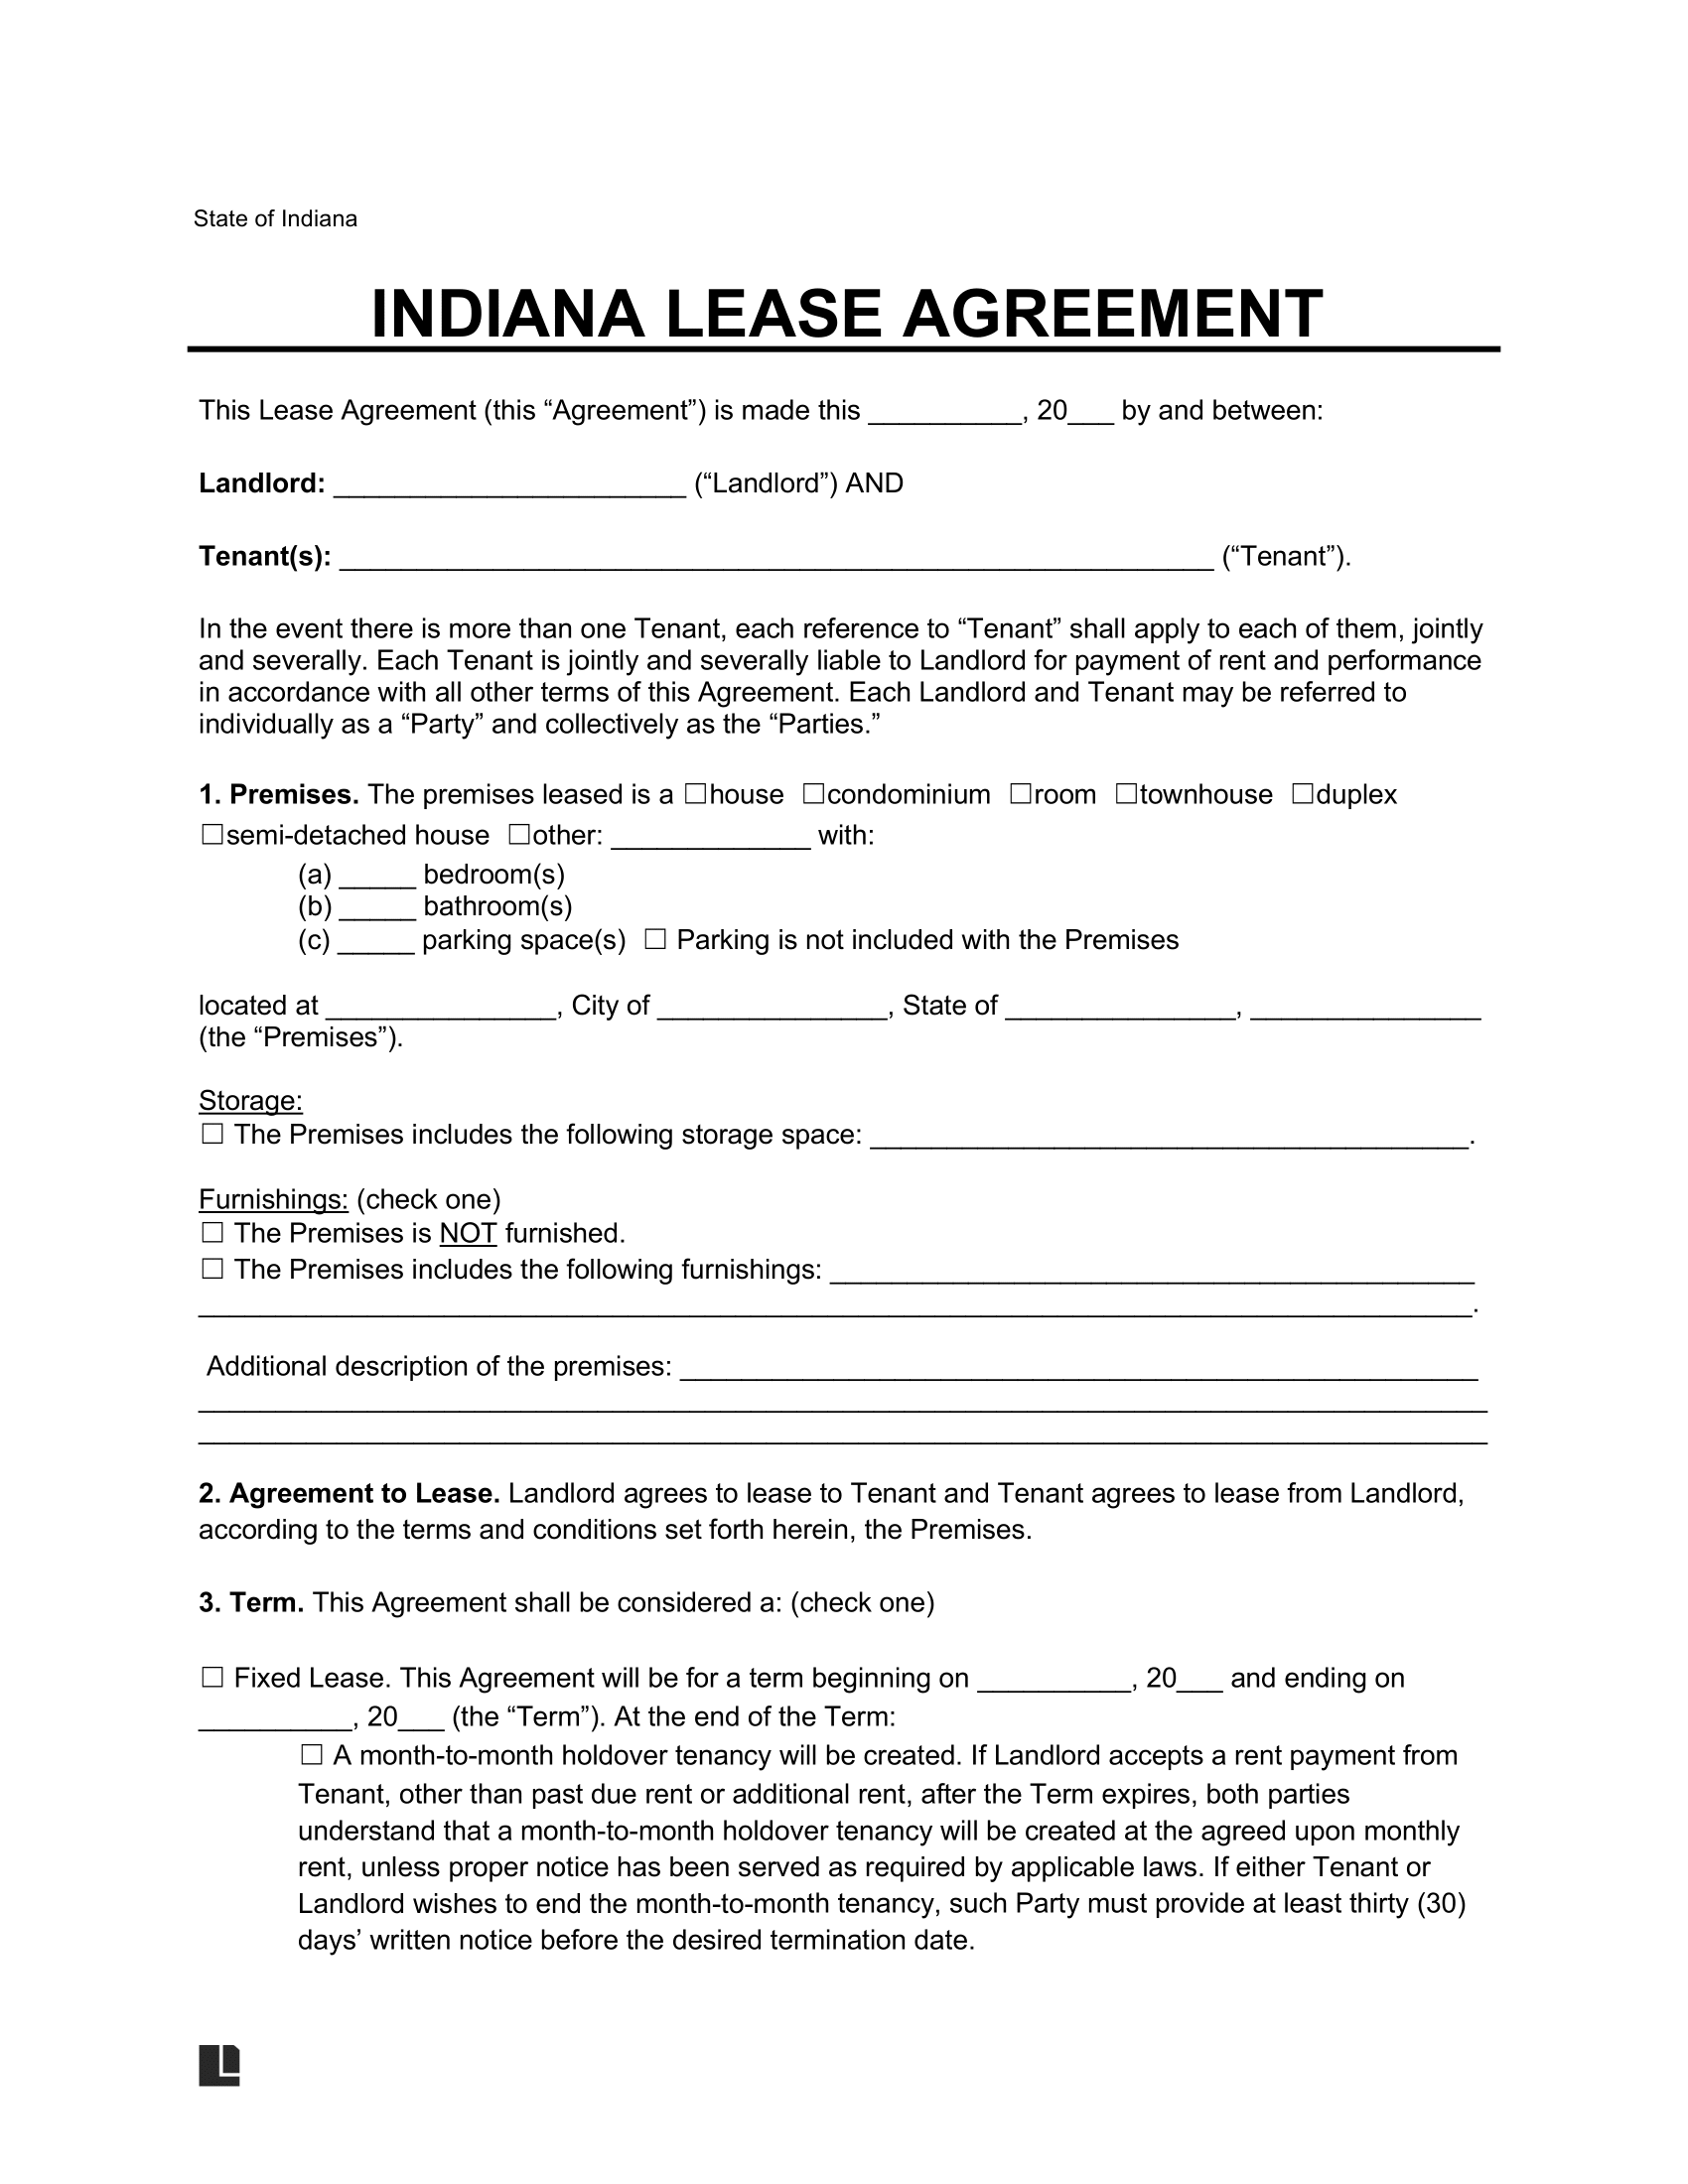 Indiana Residential Lease Agreement